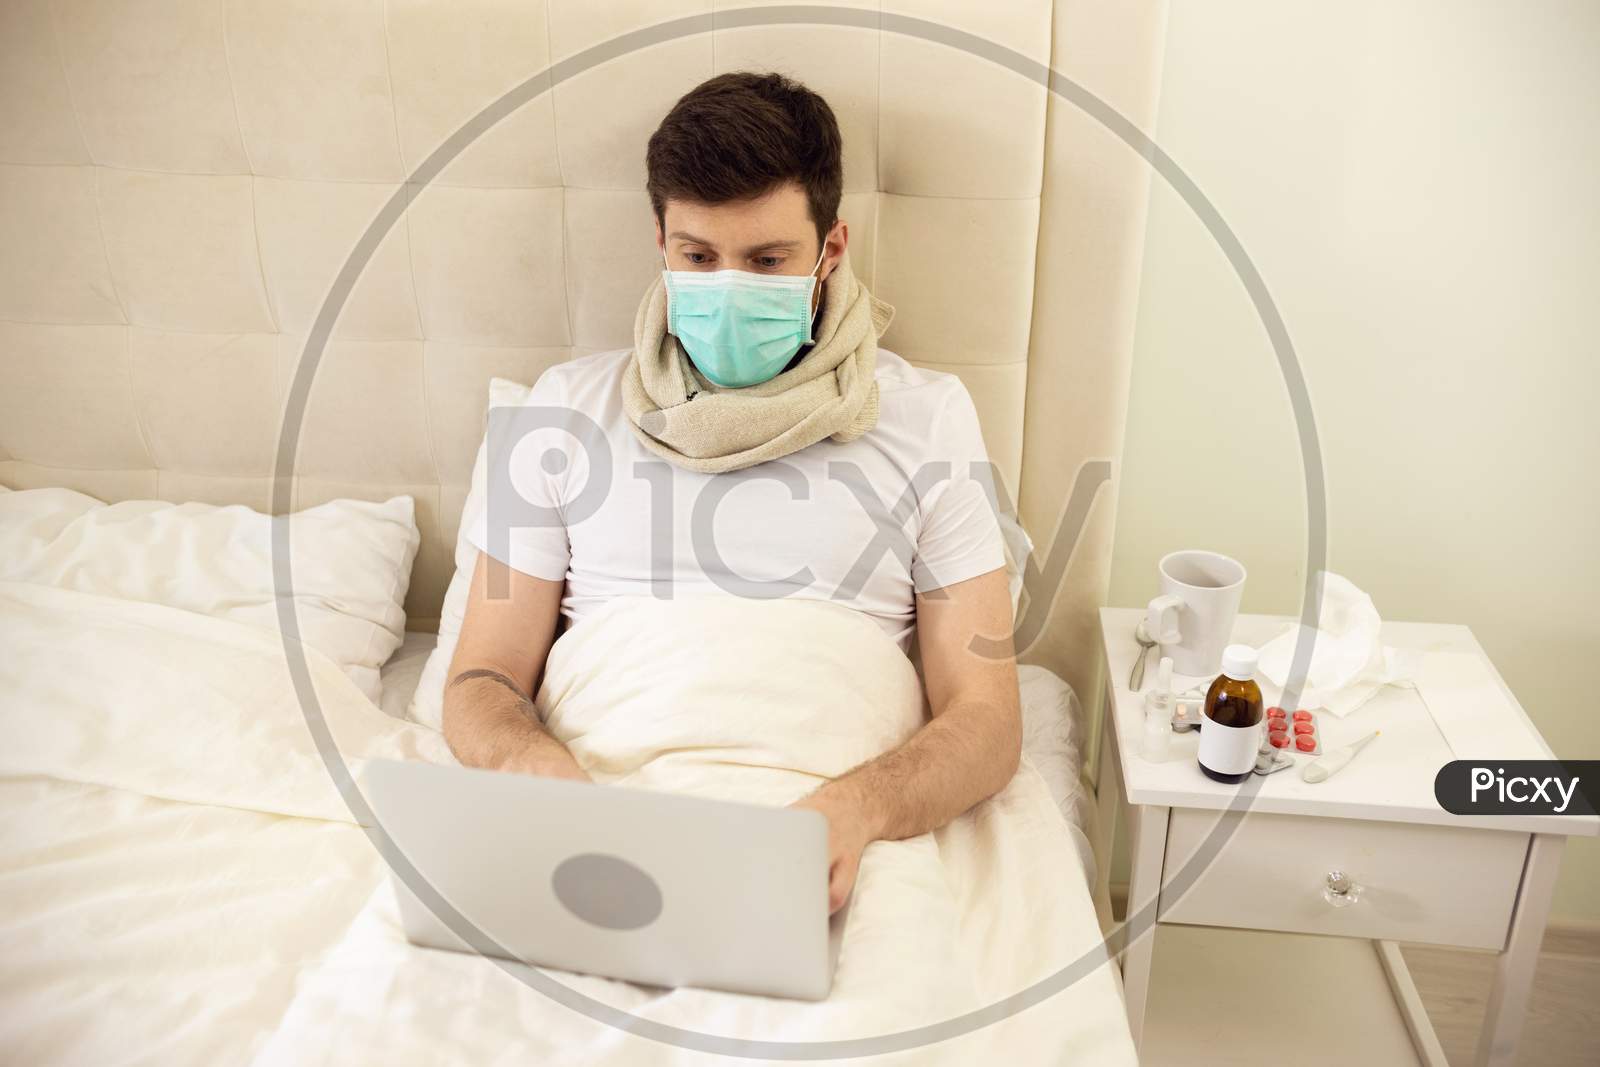 Sick Man Working In Bed Wearing Medical Mask. Man Working At Home. Man Using Laptop In Bed. Man Ill At Home. Quarantine, Home Work, Medical Care.